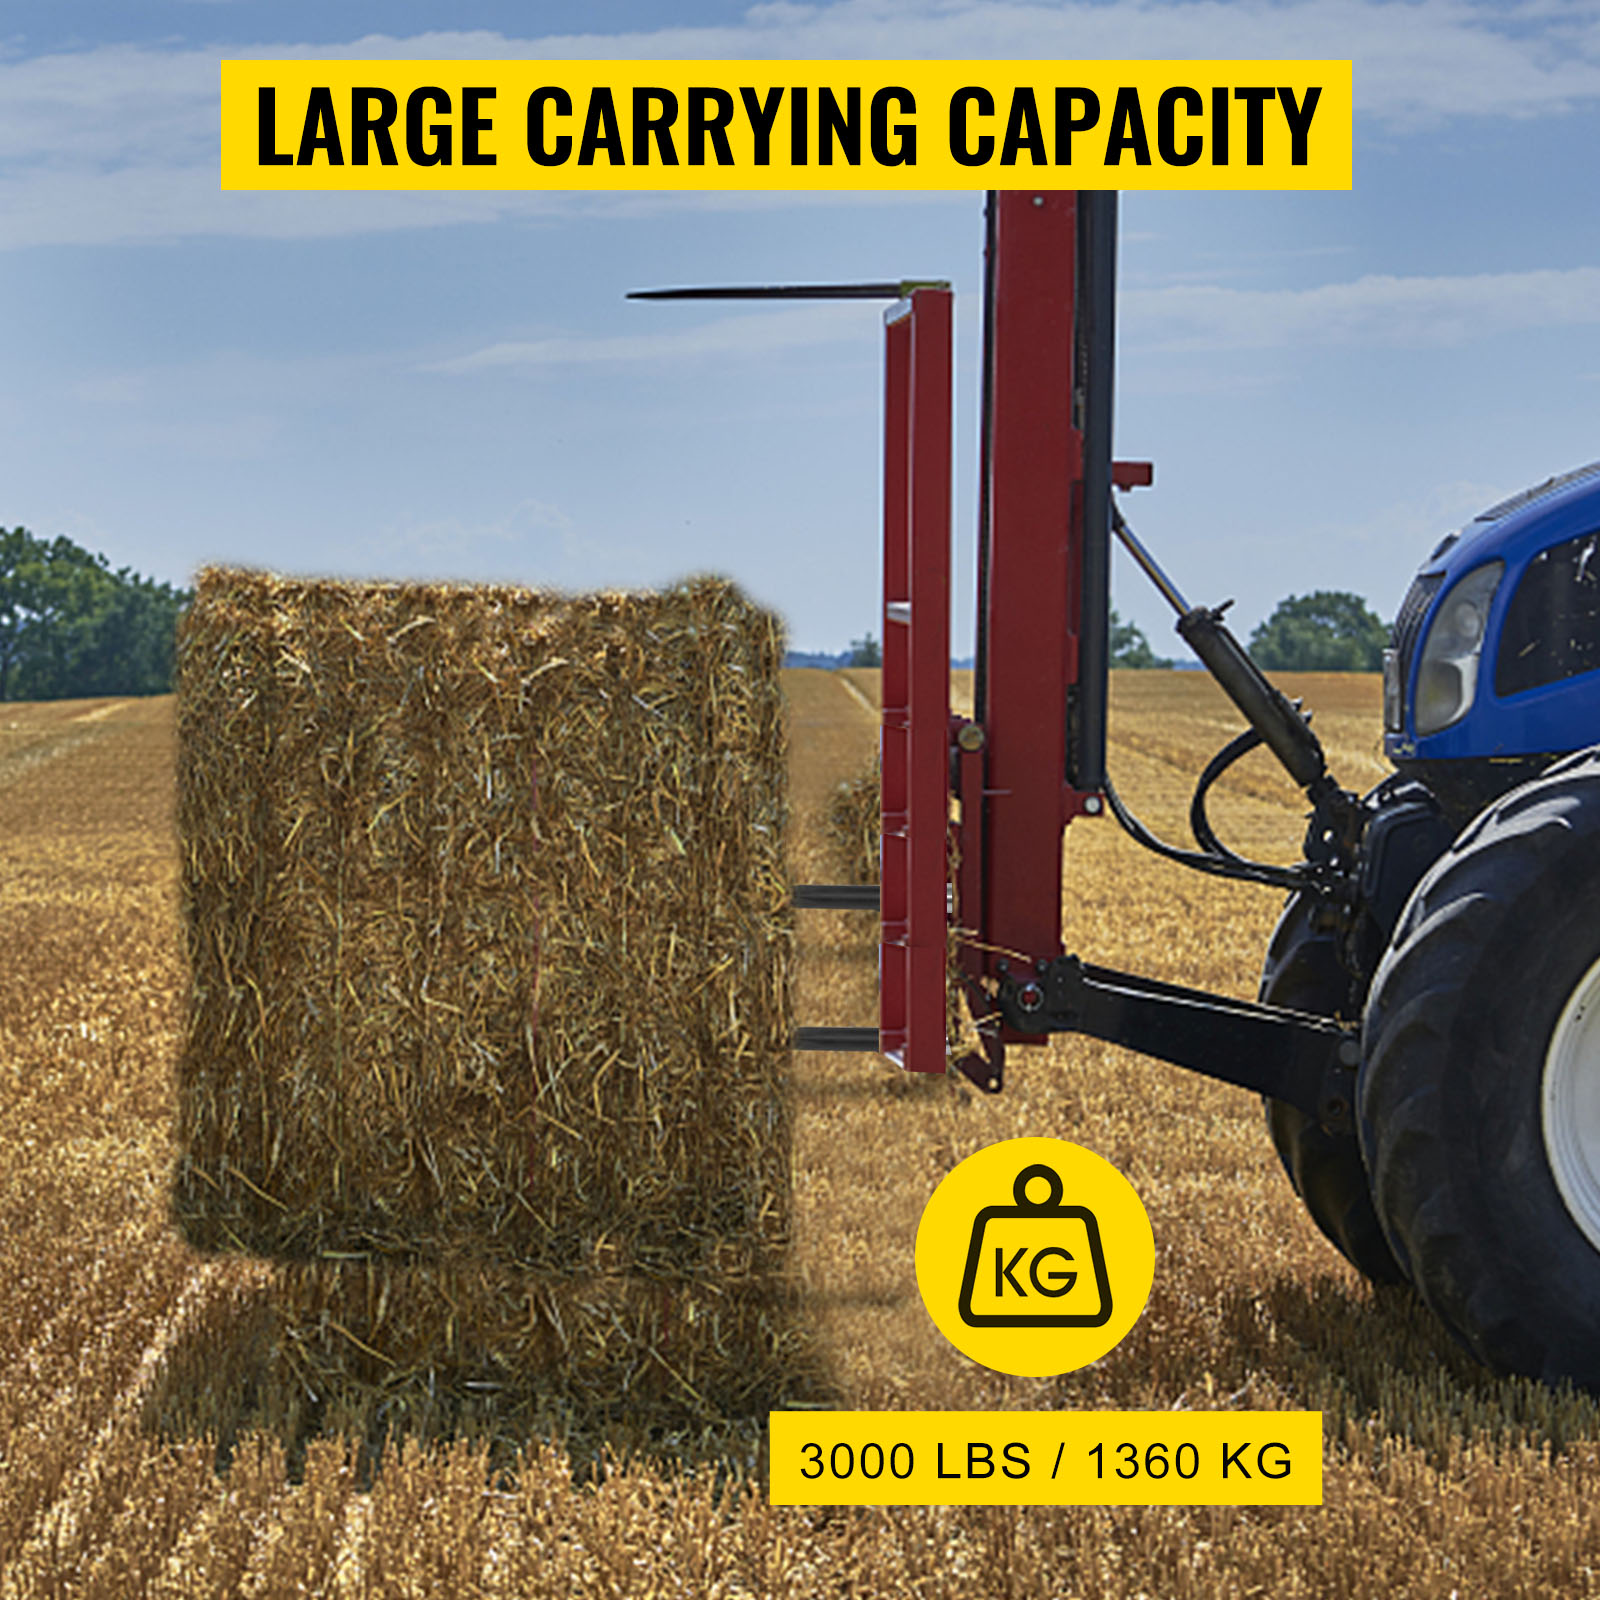  Hay Spear Attachment, 49 Inch 3000lbs Tractor Capacity